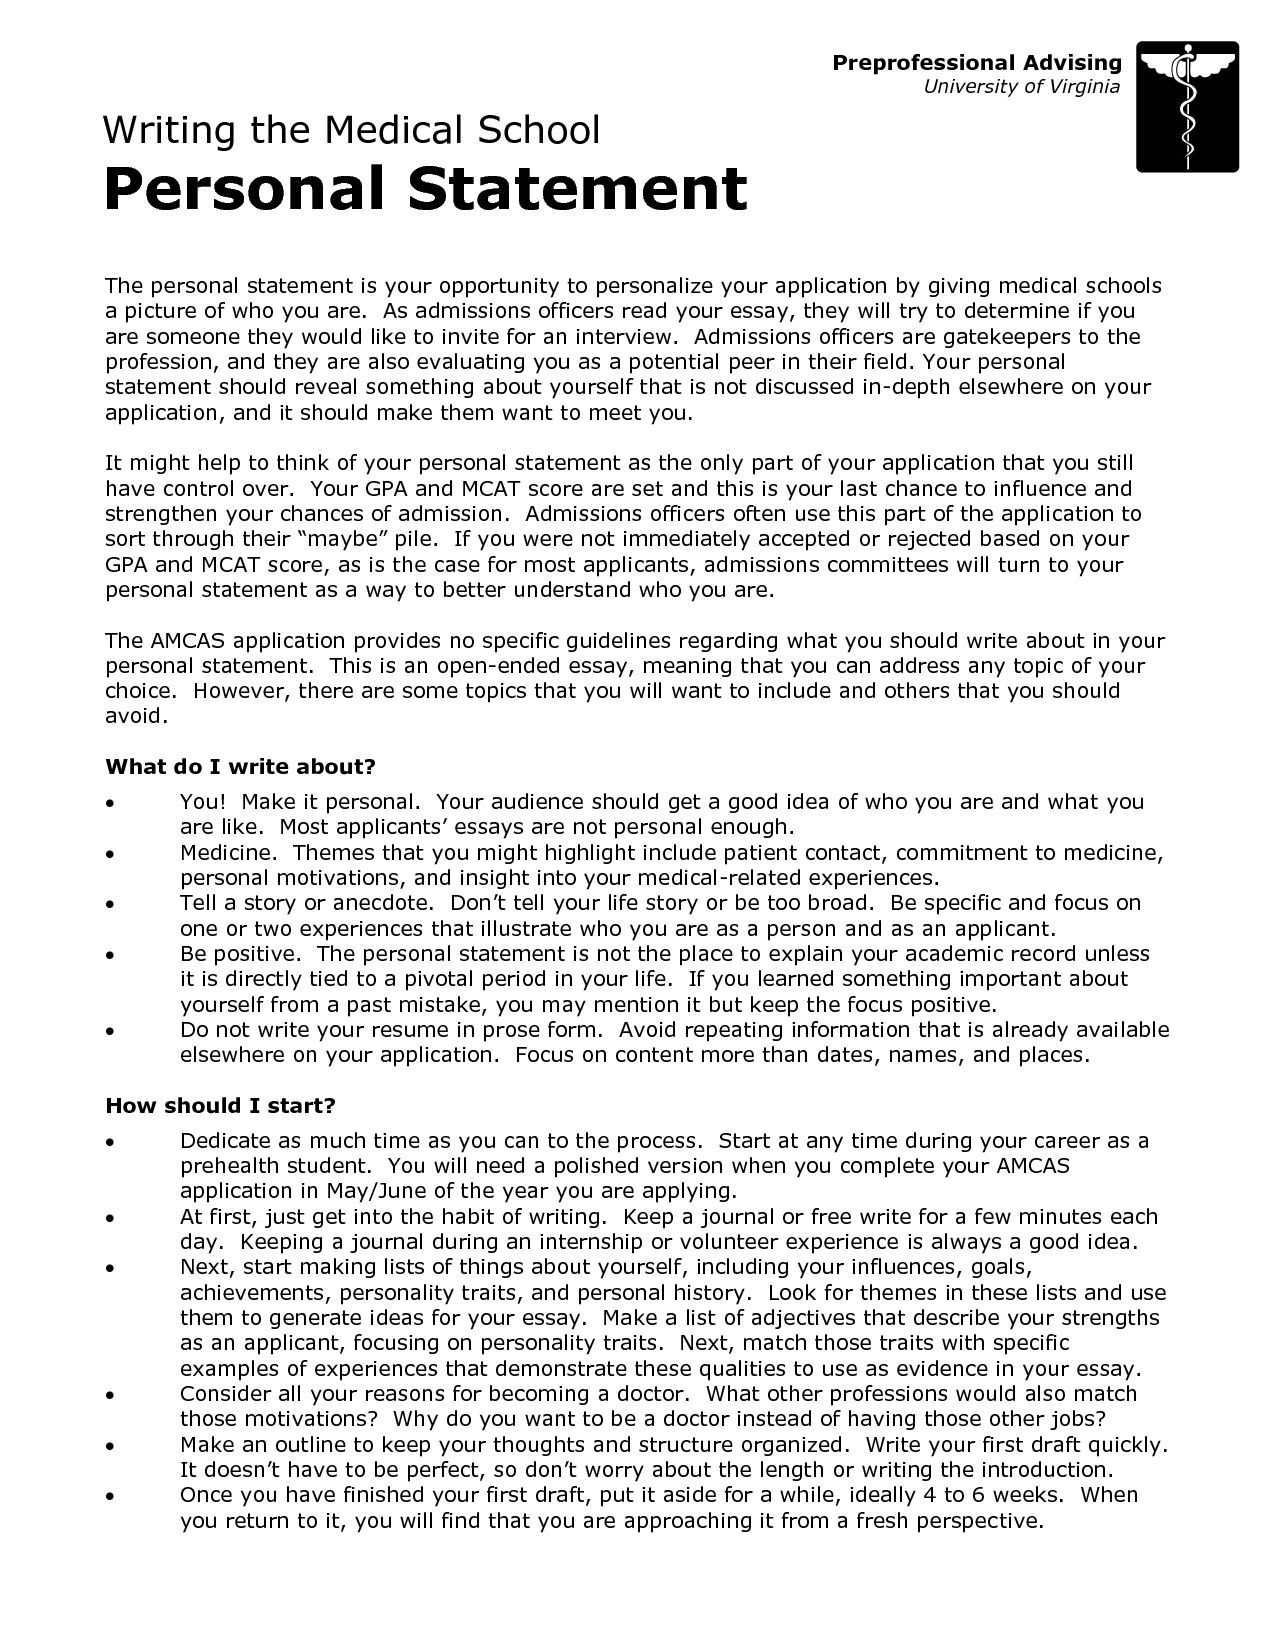 Example College Admissions Personal Essay